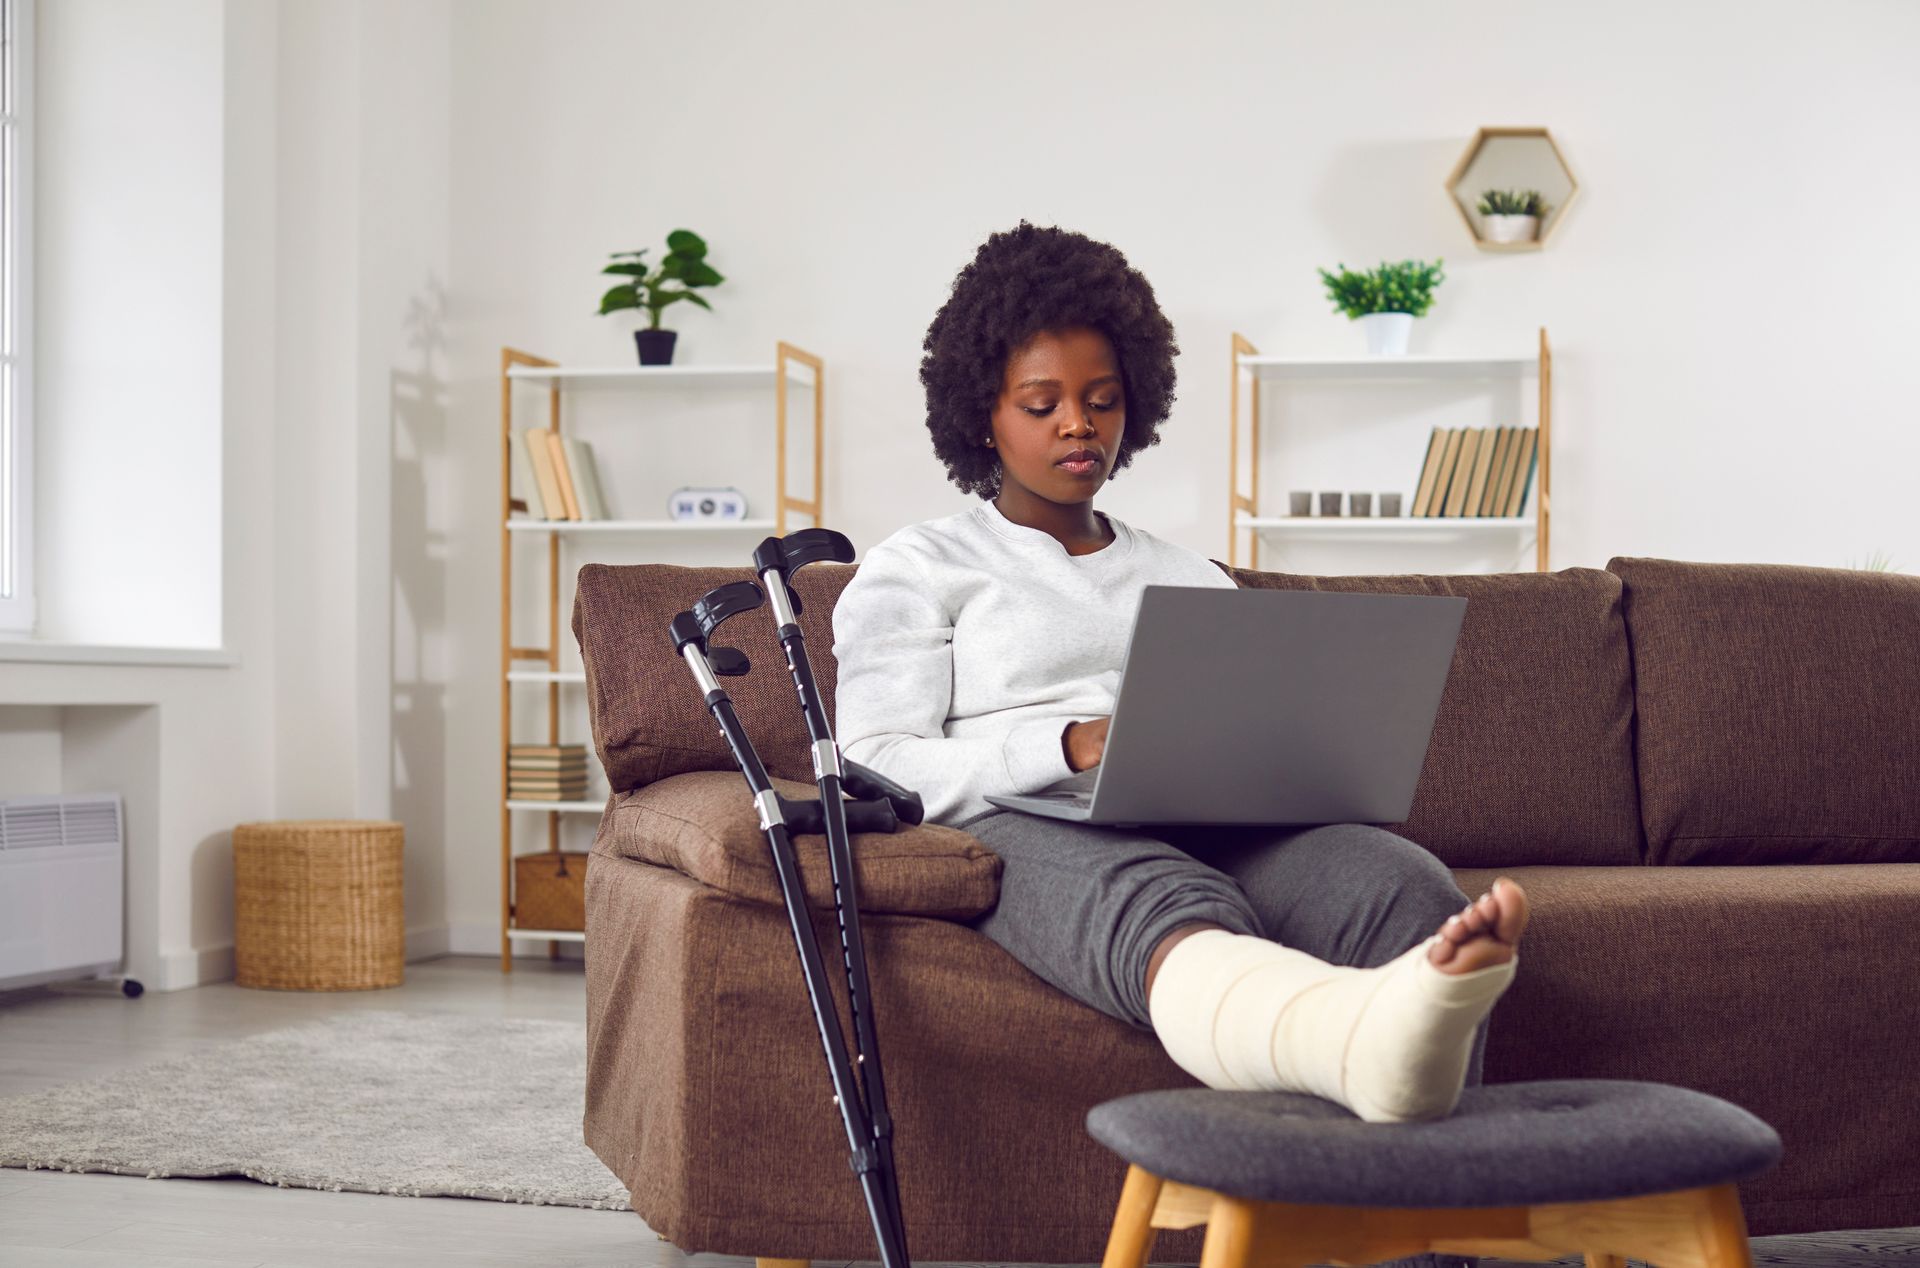 A woman with a cast on her leg is sitting on a couch using a laptop computer.